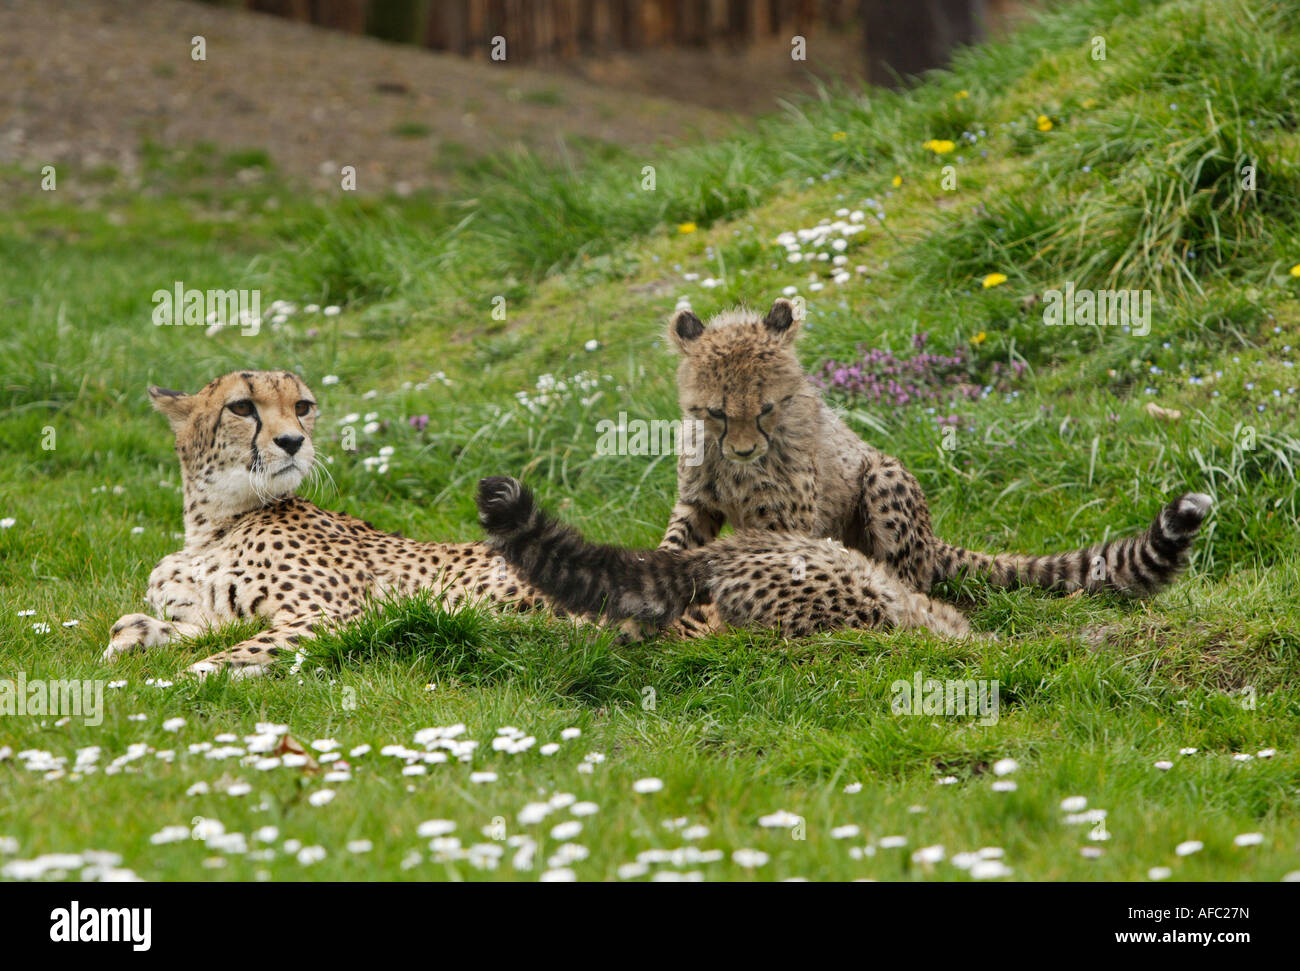 Cheetah with young animals Stock Photo